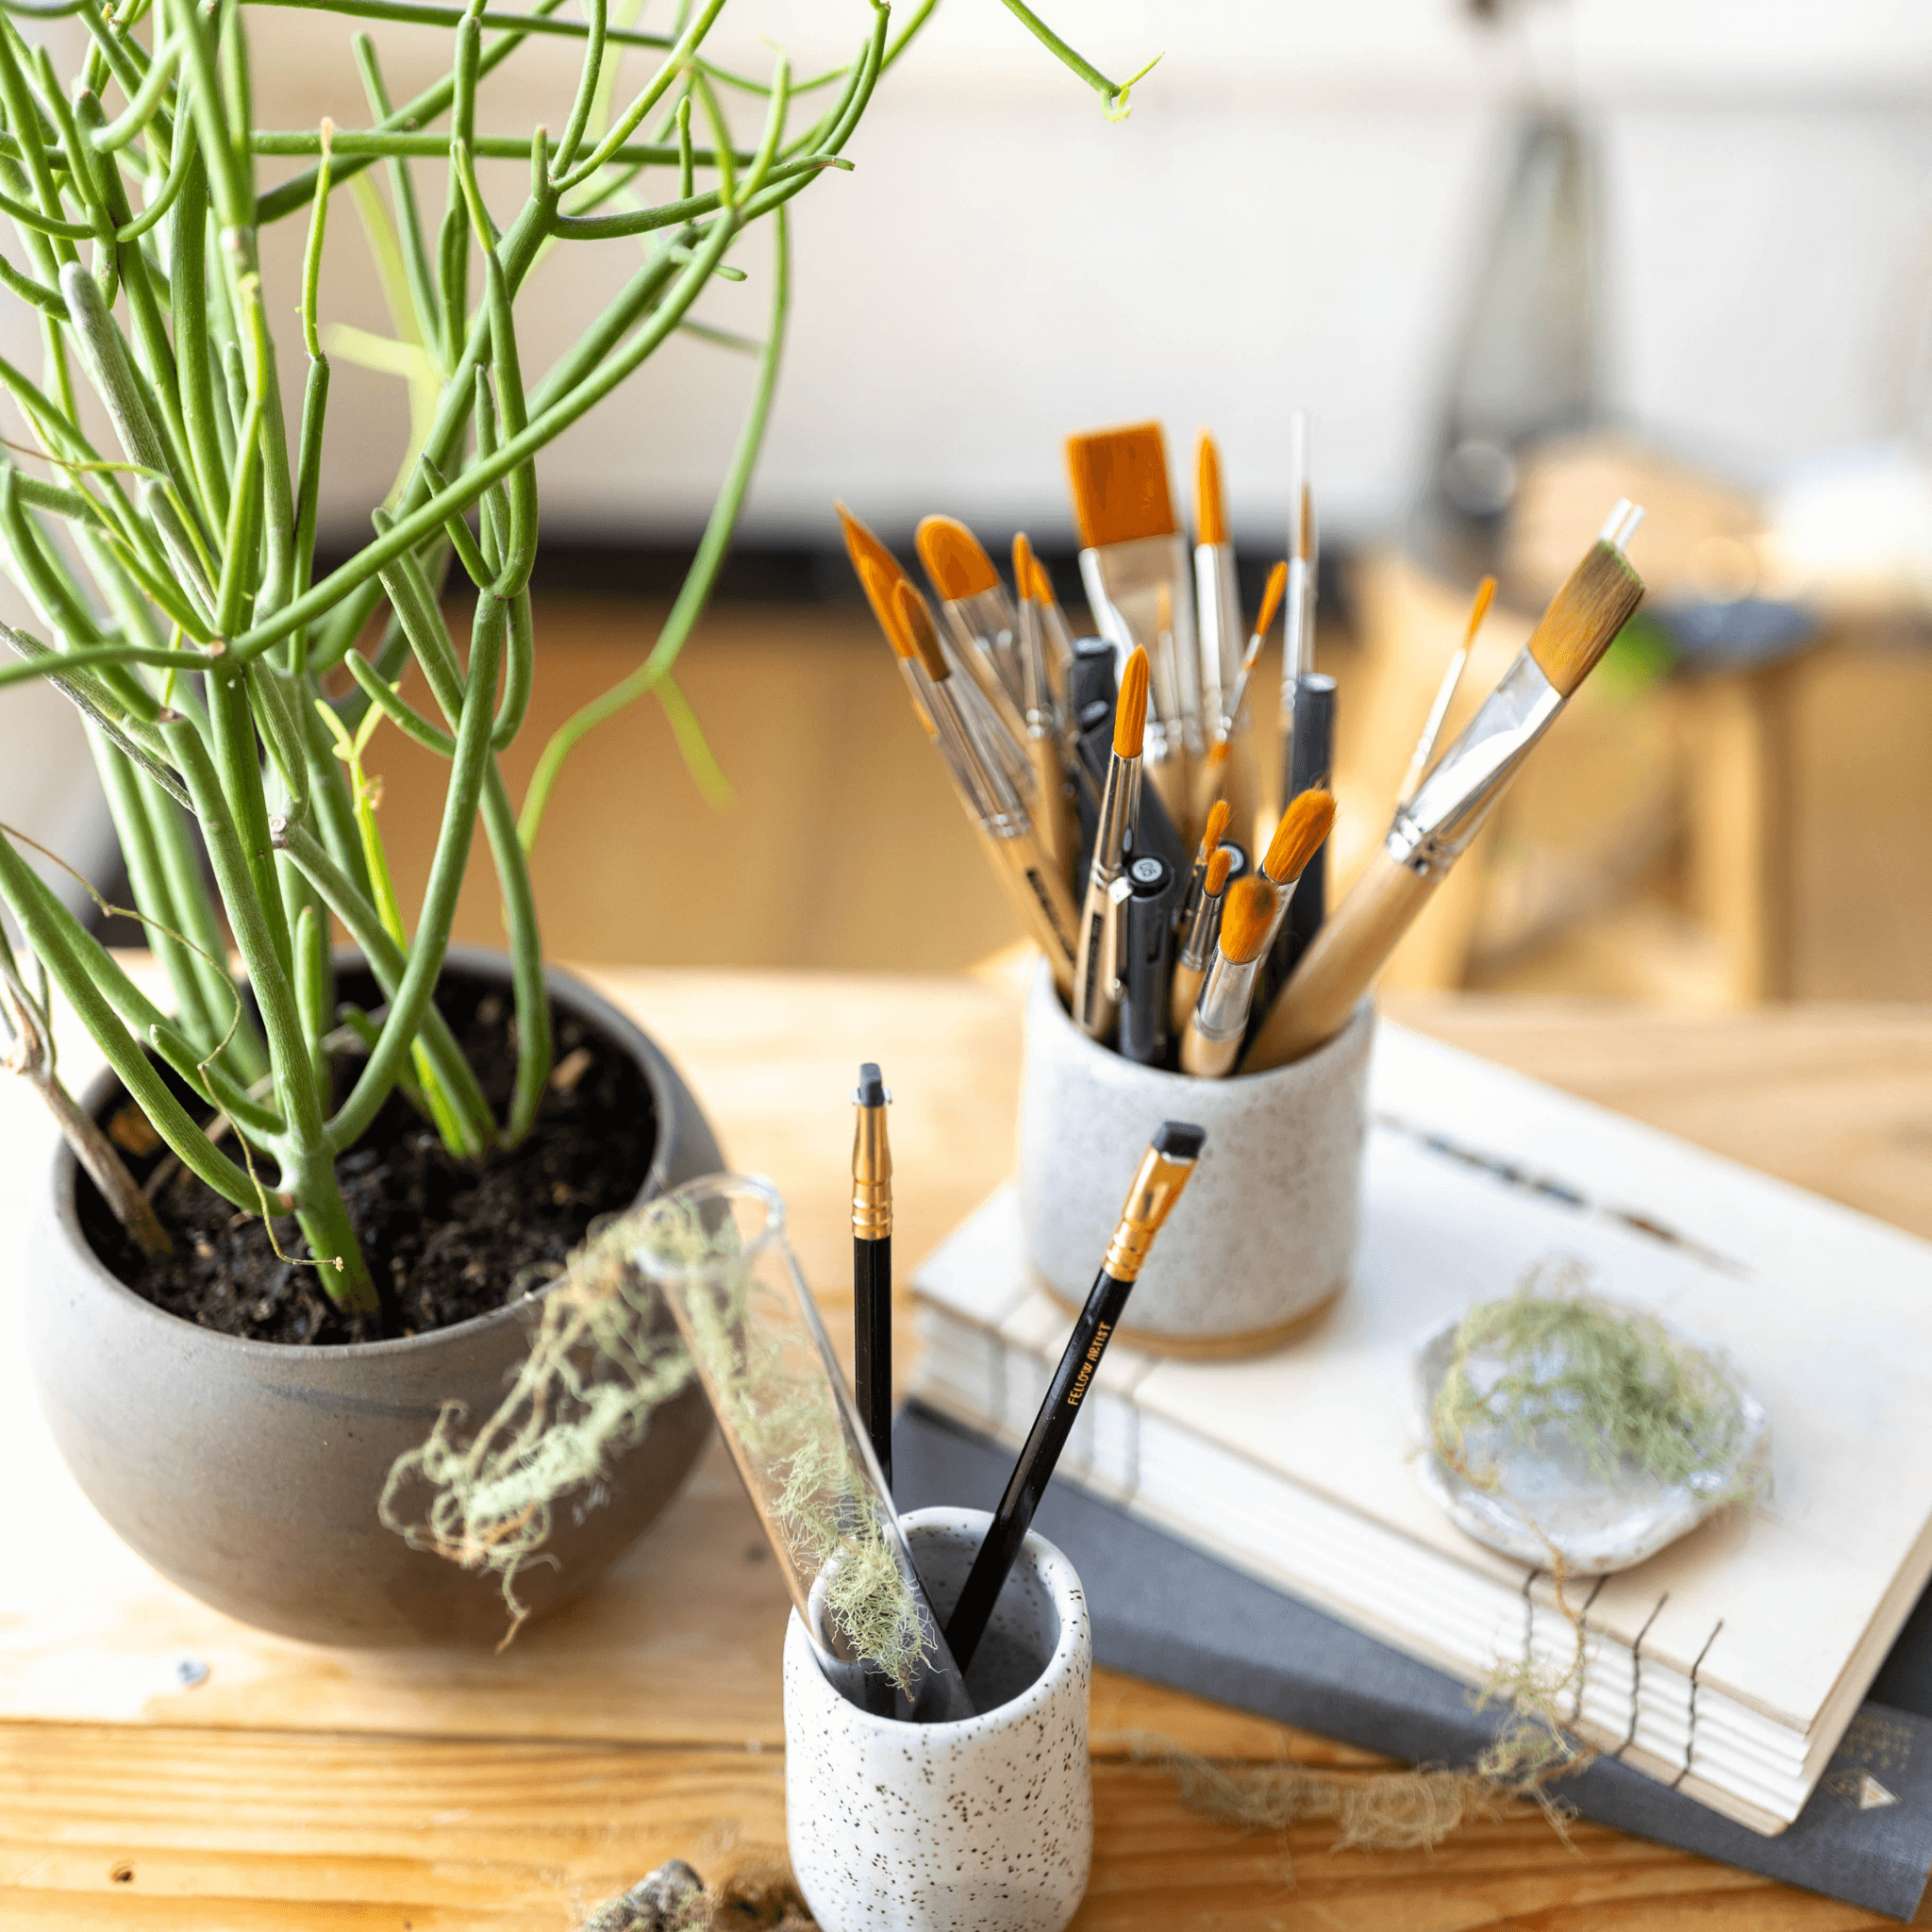 Still life photograph of paintbrushes and nature elements